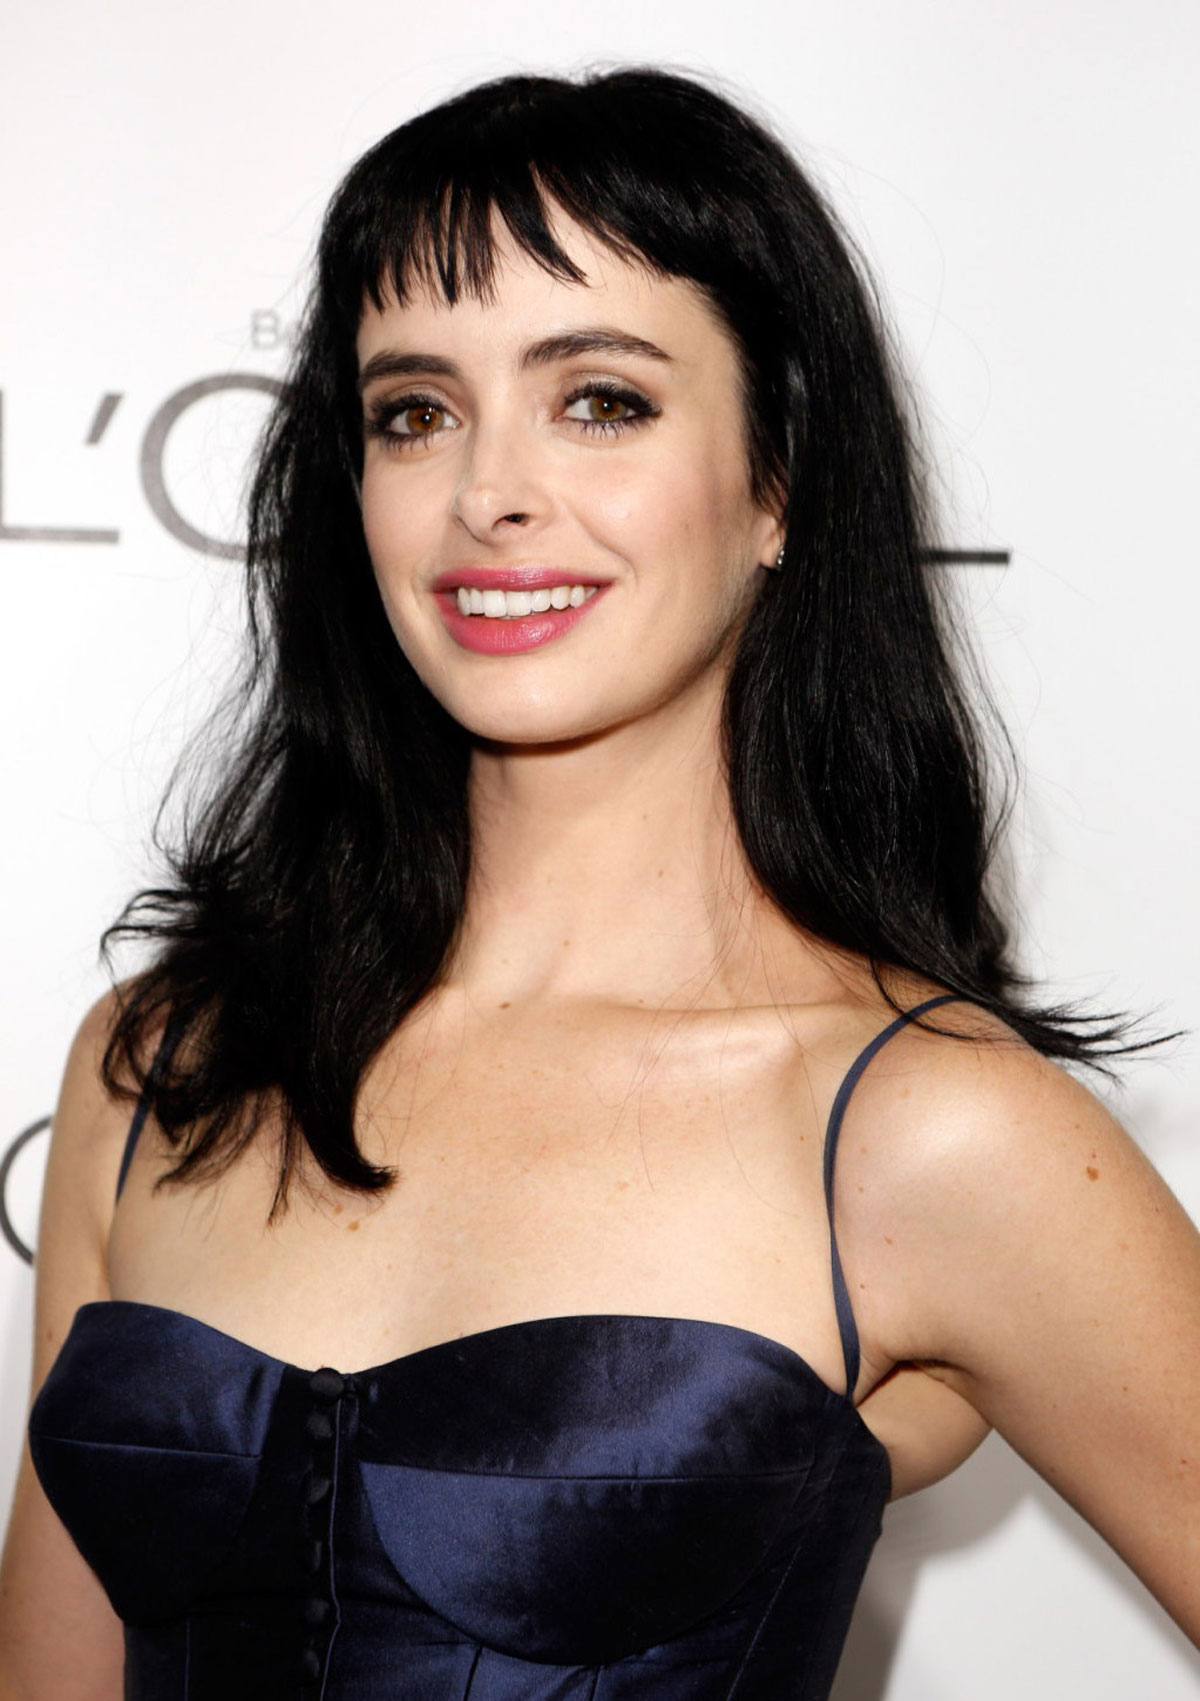 KRYSTEN RITTER at ELLE’s Women in Hollywood Event in Beverly Hills .